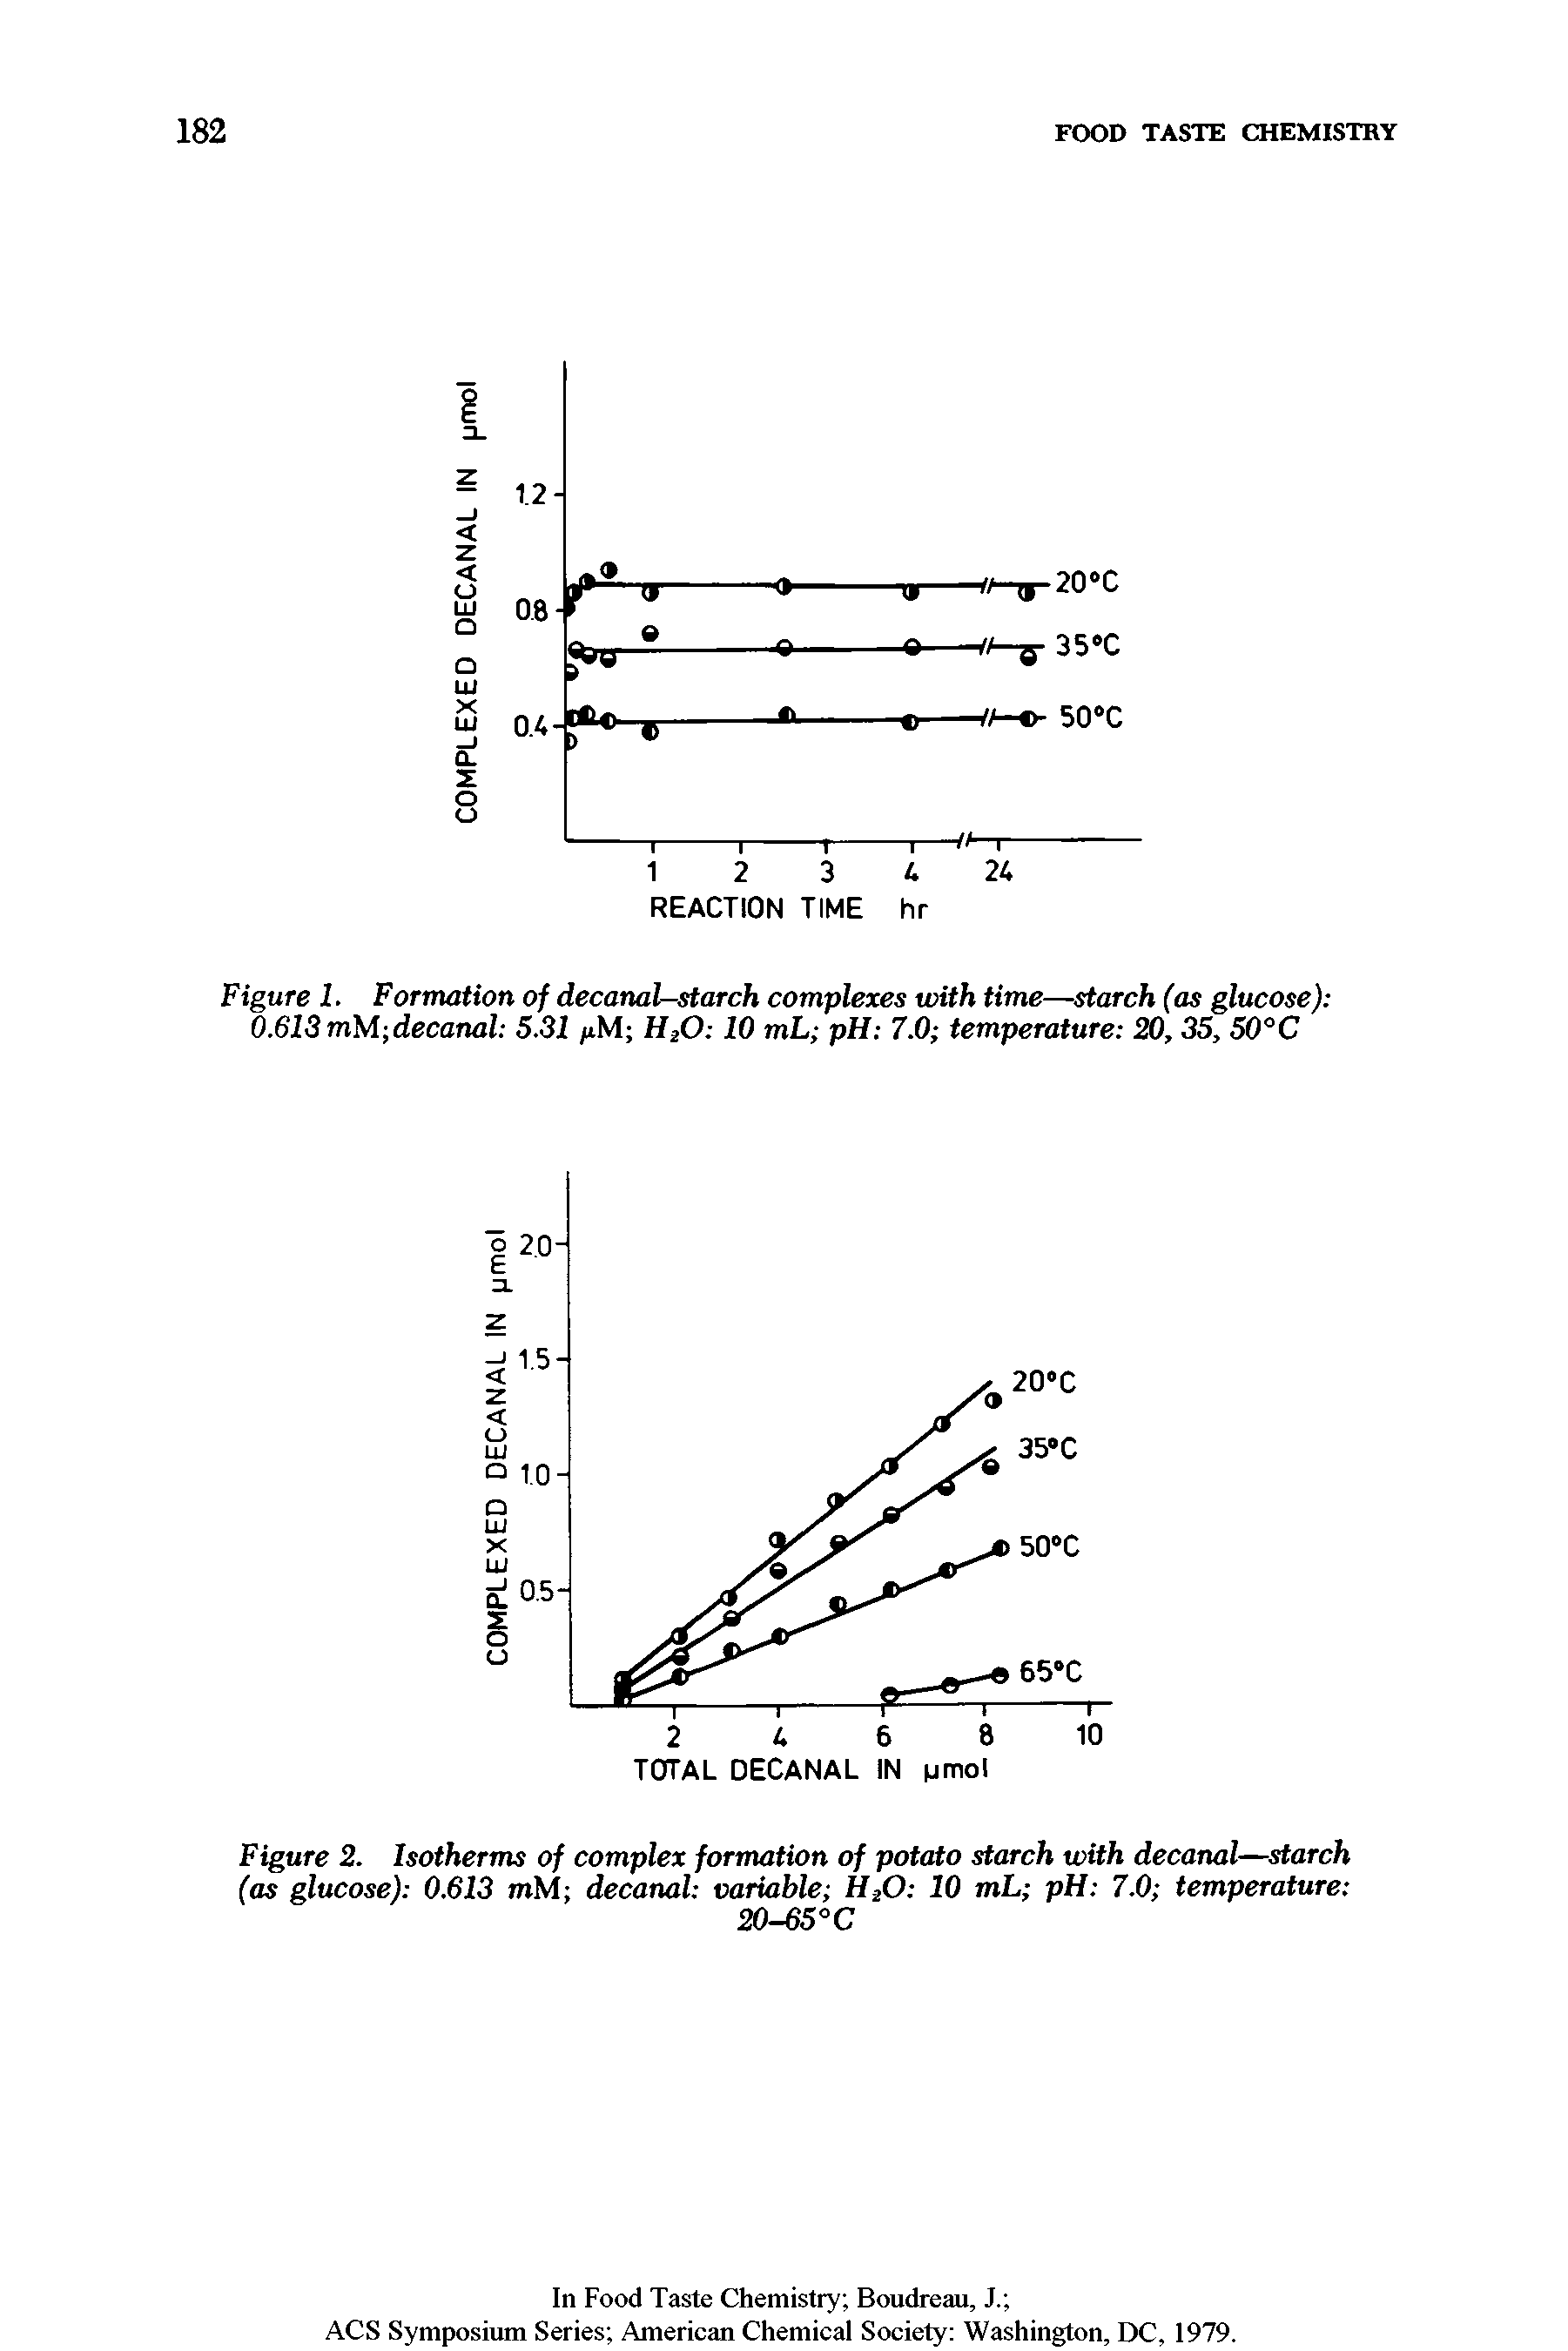 Figure 1. Formation of decanal—starch complexes with time—starch (as glucose) 0.613mM decanal 5.31 M H20 10 mL pH 7.0 temperature 20, 35, 50°C...